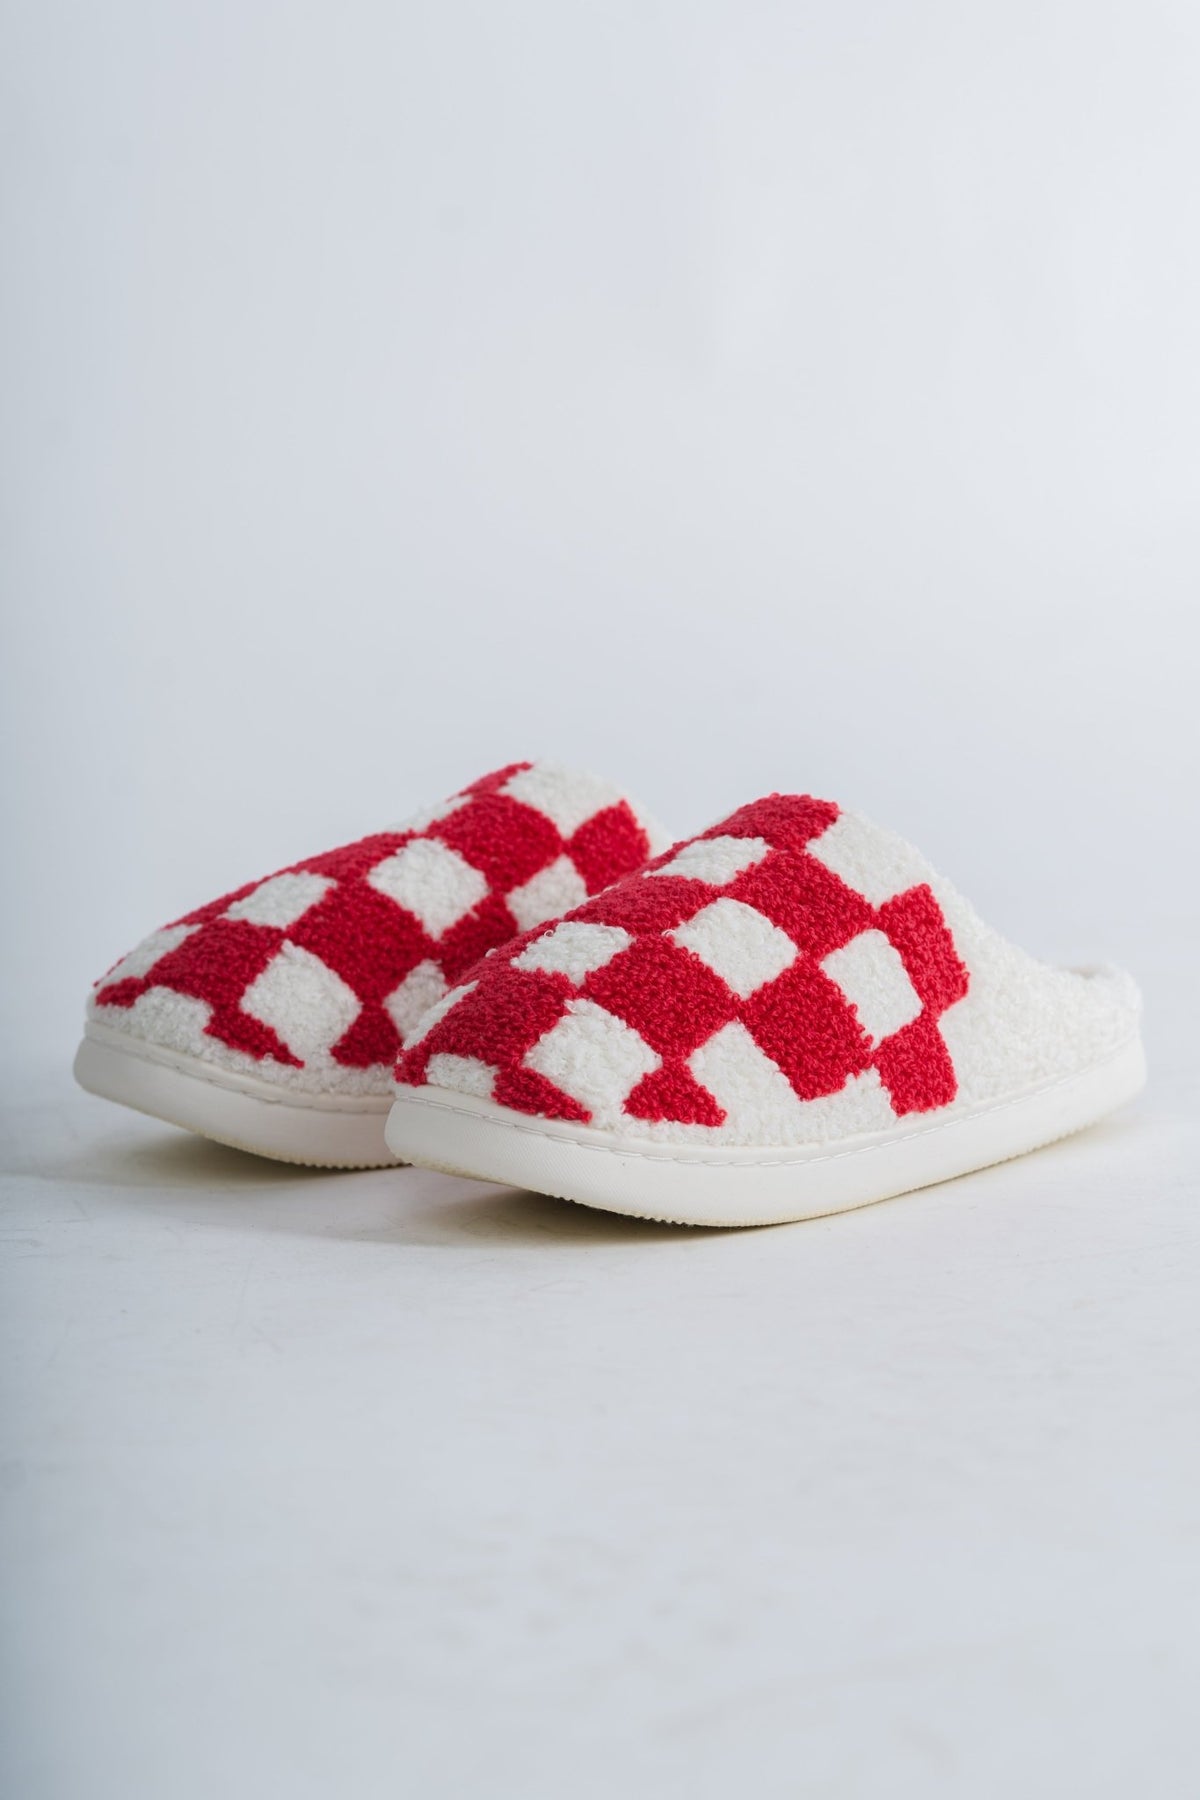 Checkered slip on slippers fuchsia - Trendy slippers - Cute Loungewear Collection at Lush Fashion Lounge Boutique in Oklahoma City